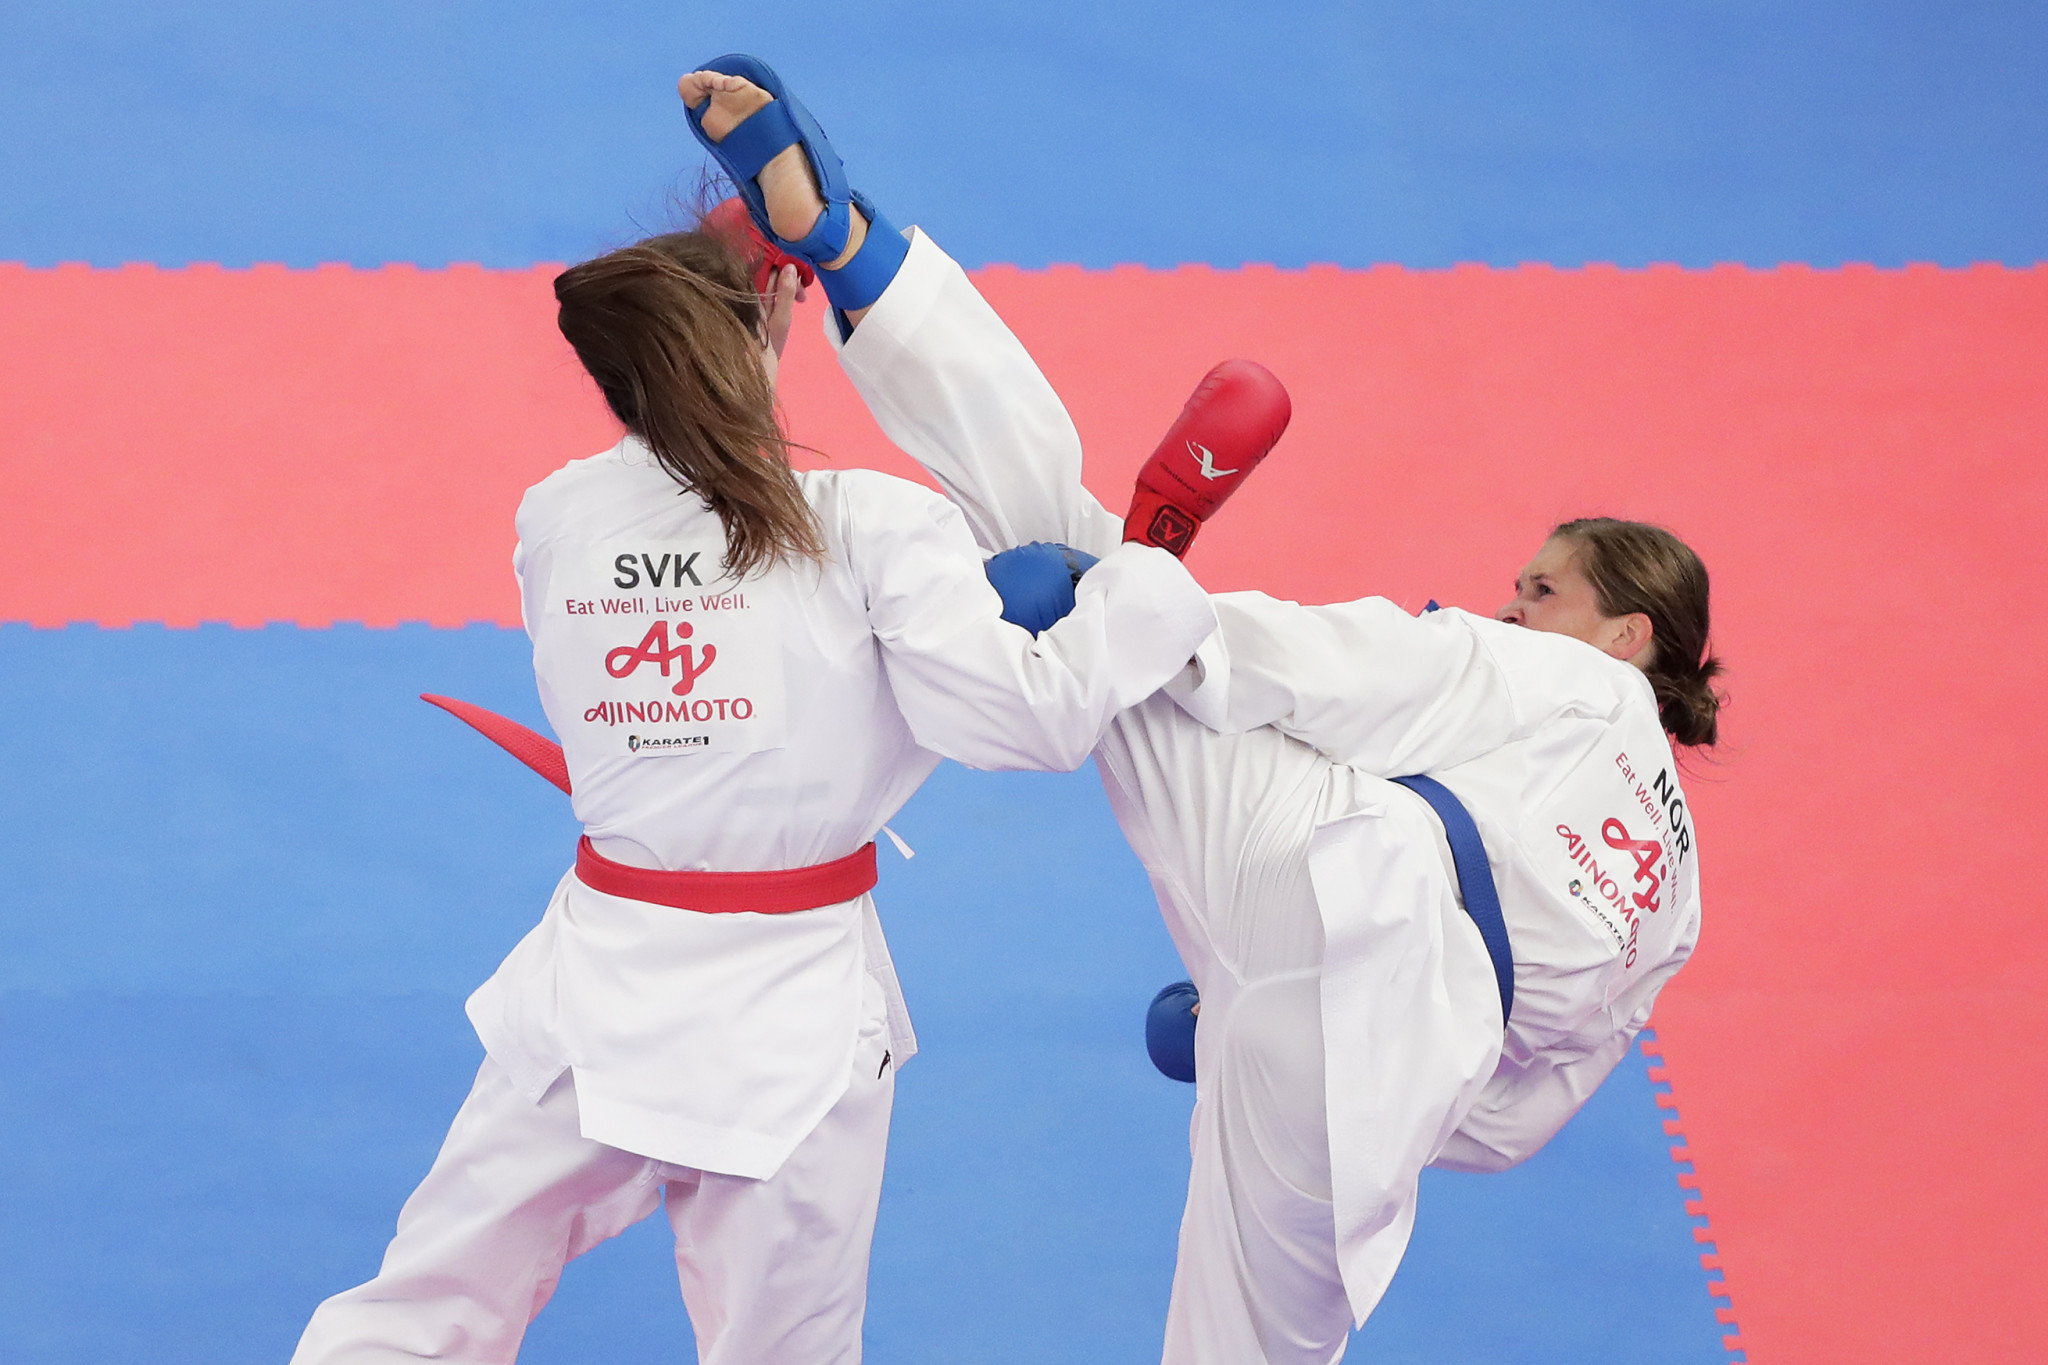 Over 300 competitors will participate in the Karate 1-Premier League ©Getty Images 